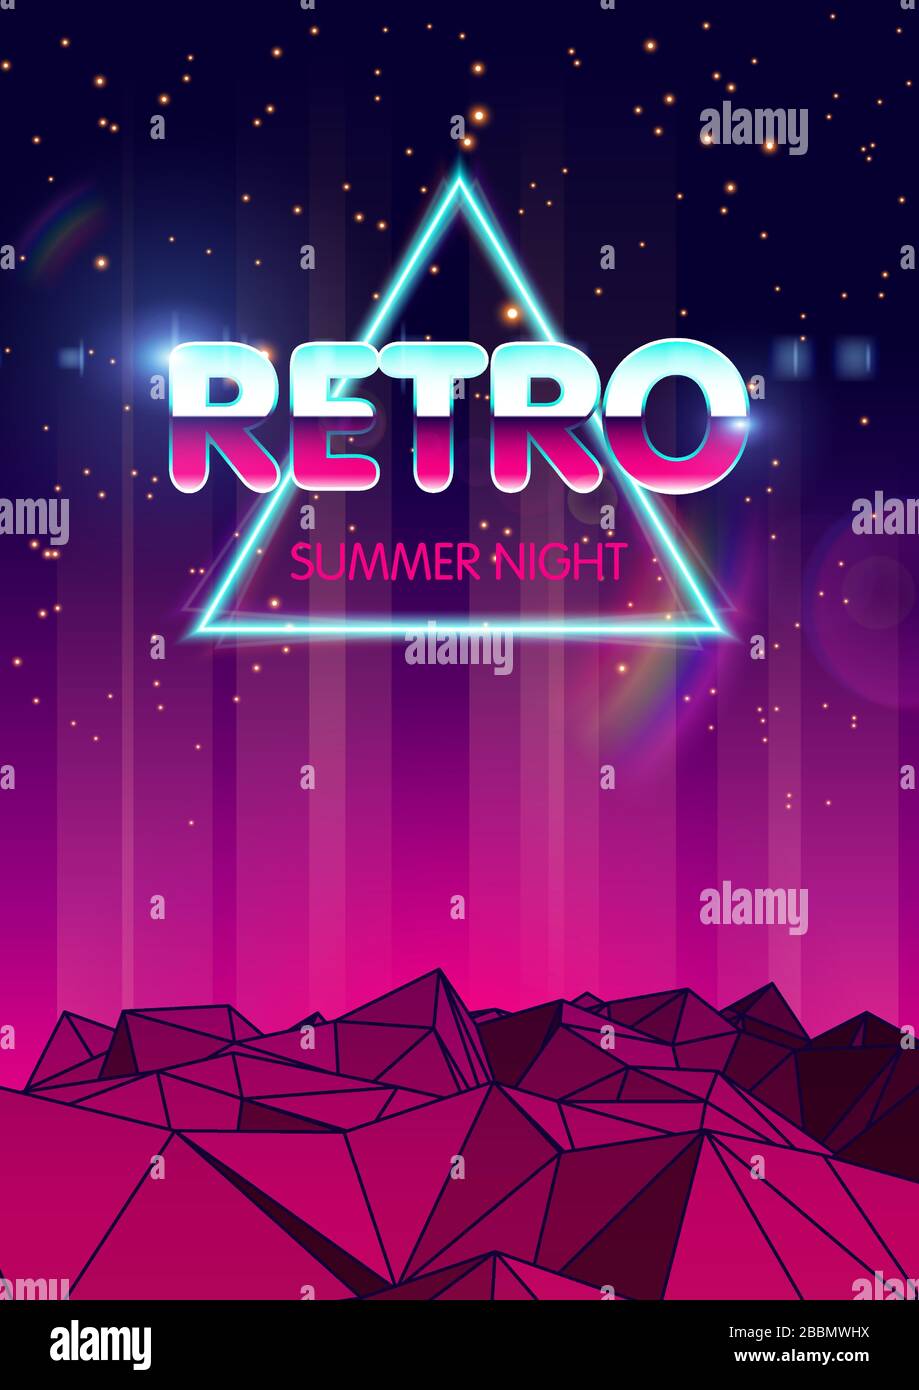 Retro Future in 1980 Style. Futuristic Flyer or Music Album Cover. Sci-Fi Background. 80s Party Background. Retro Wave Space with Mountains and Laser Rays. Stock Vector